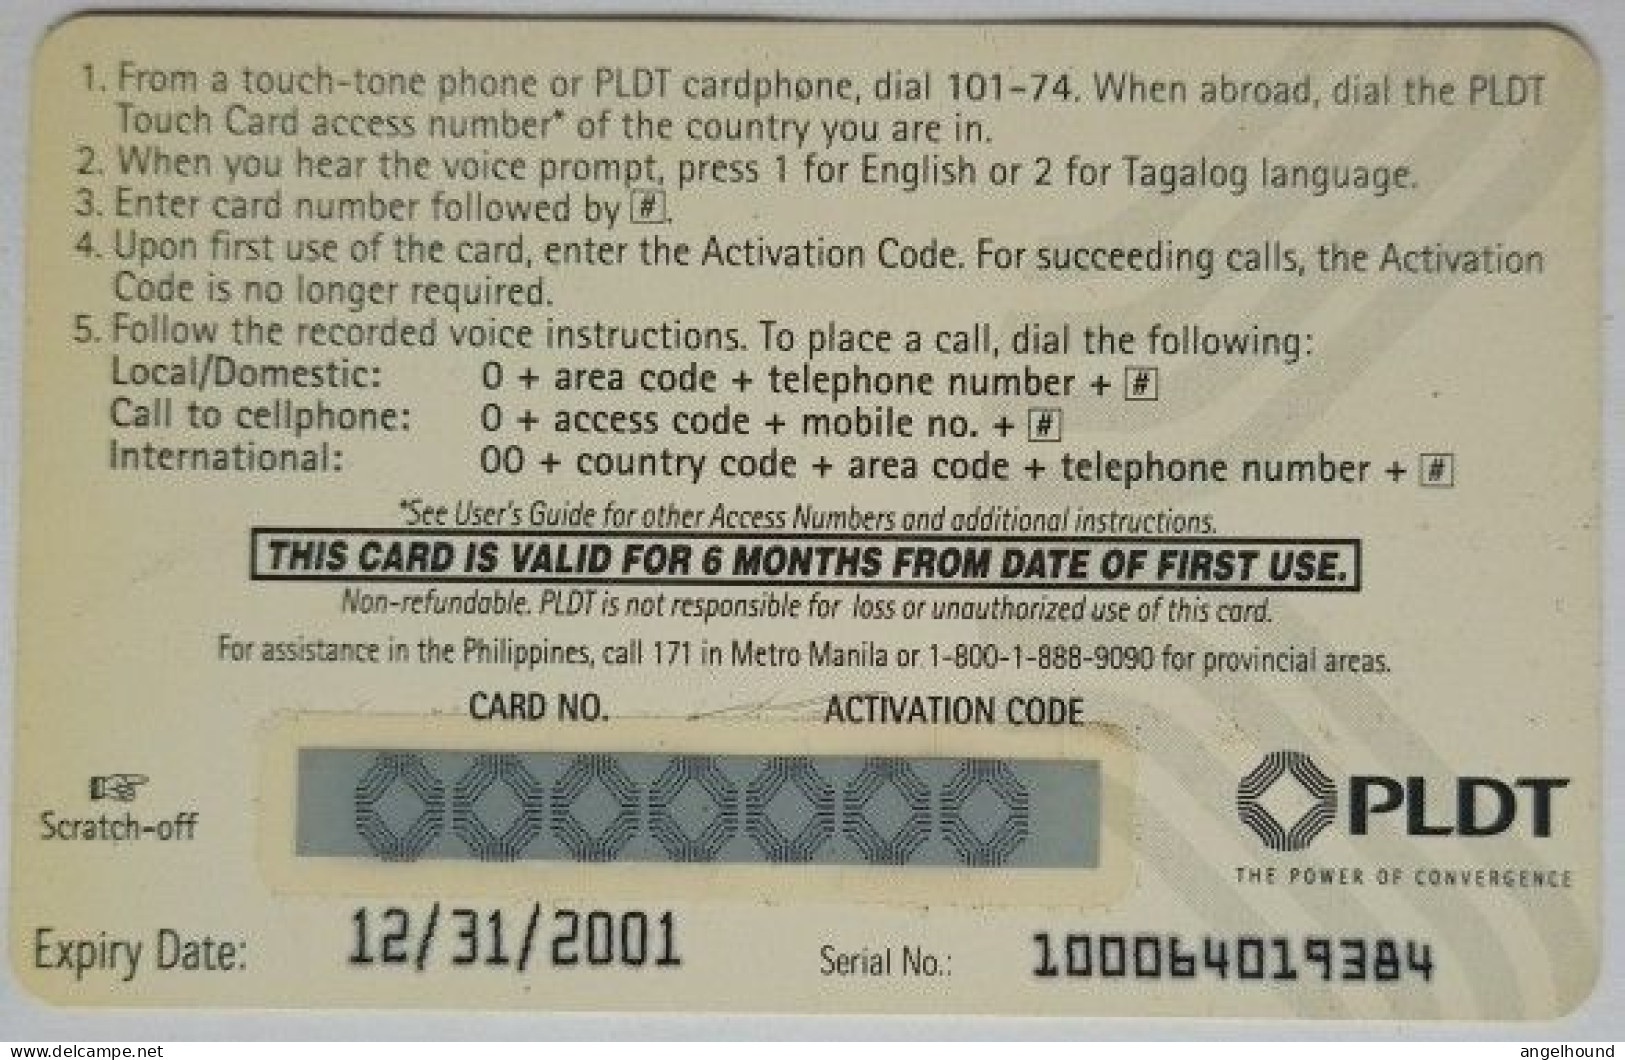 Philippines PLDT Touch Card  P100  MINT " Tupperware " - Philippines